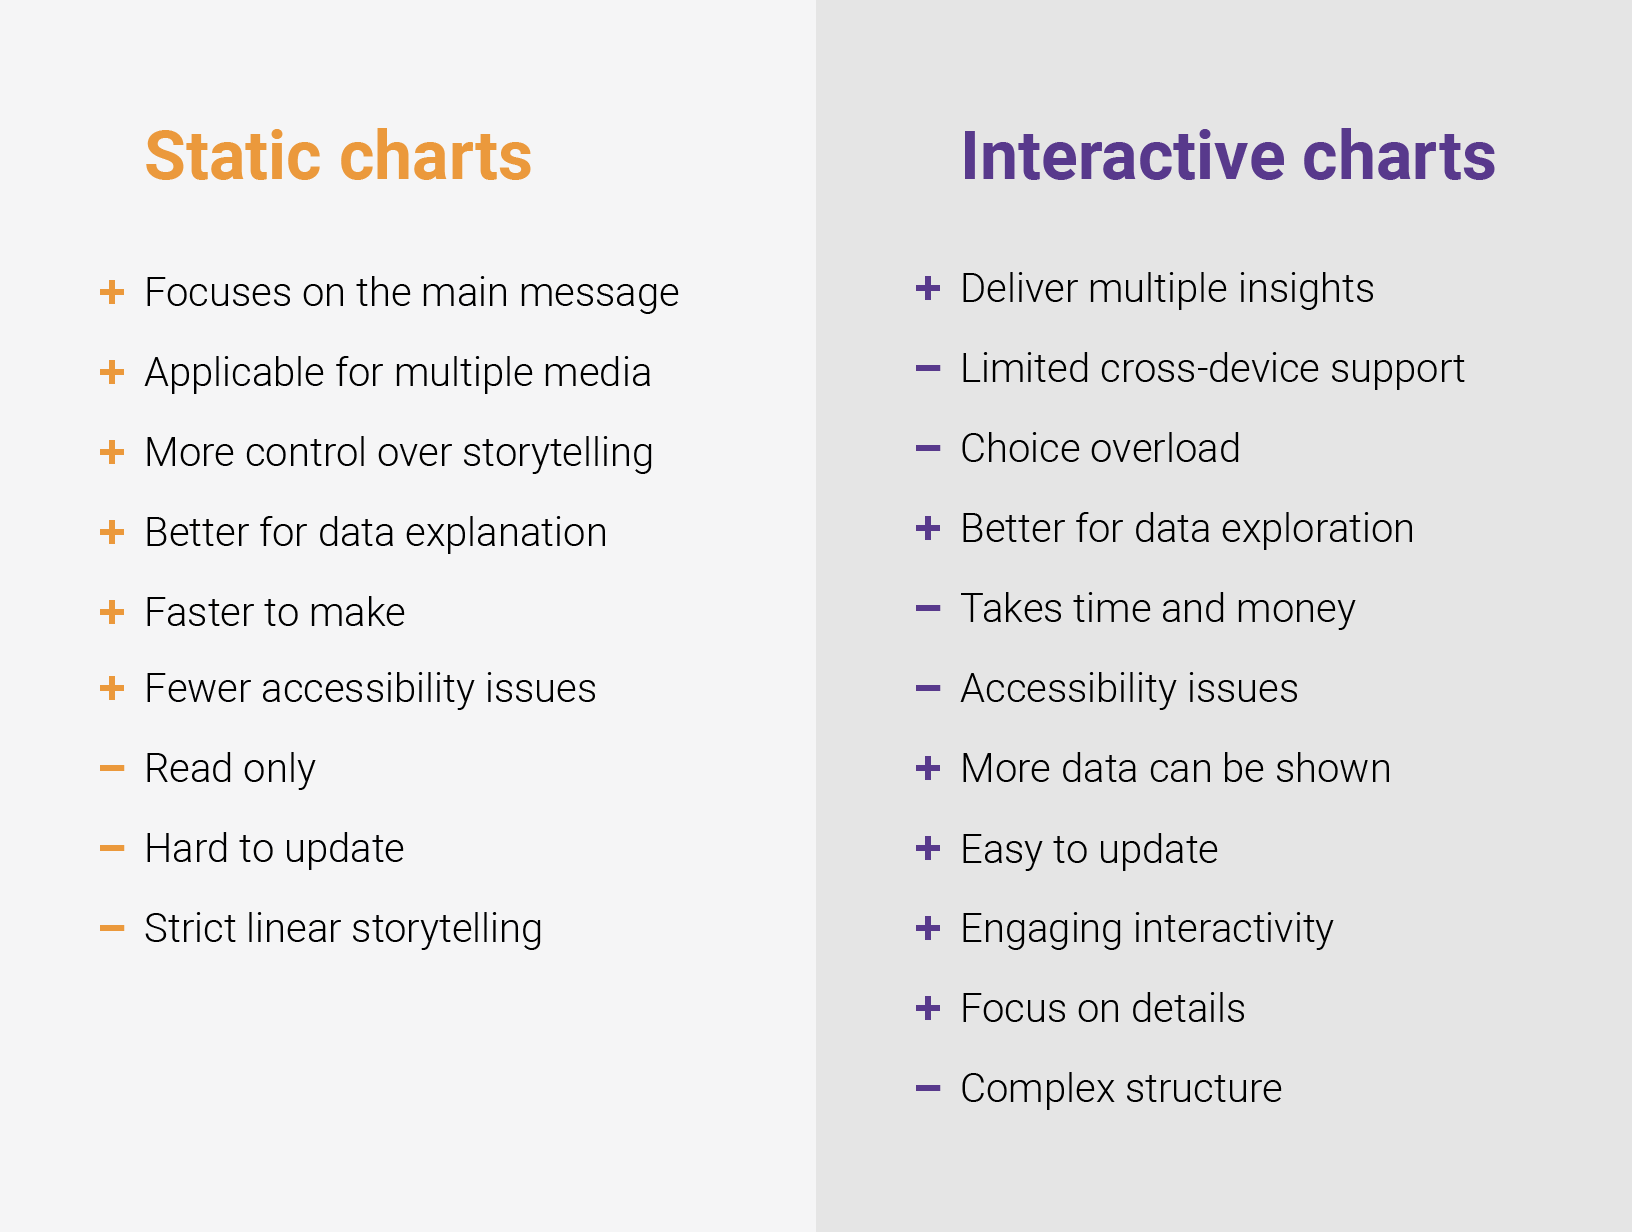 The table compares pros and cons of static charts and interactive charts. This is a summary of the whole article.